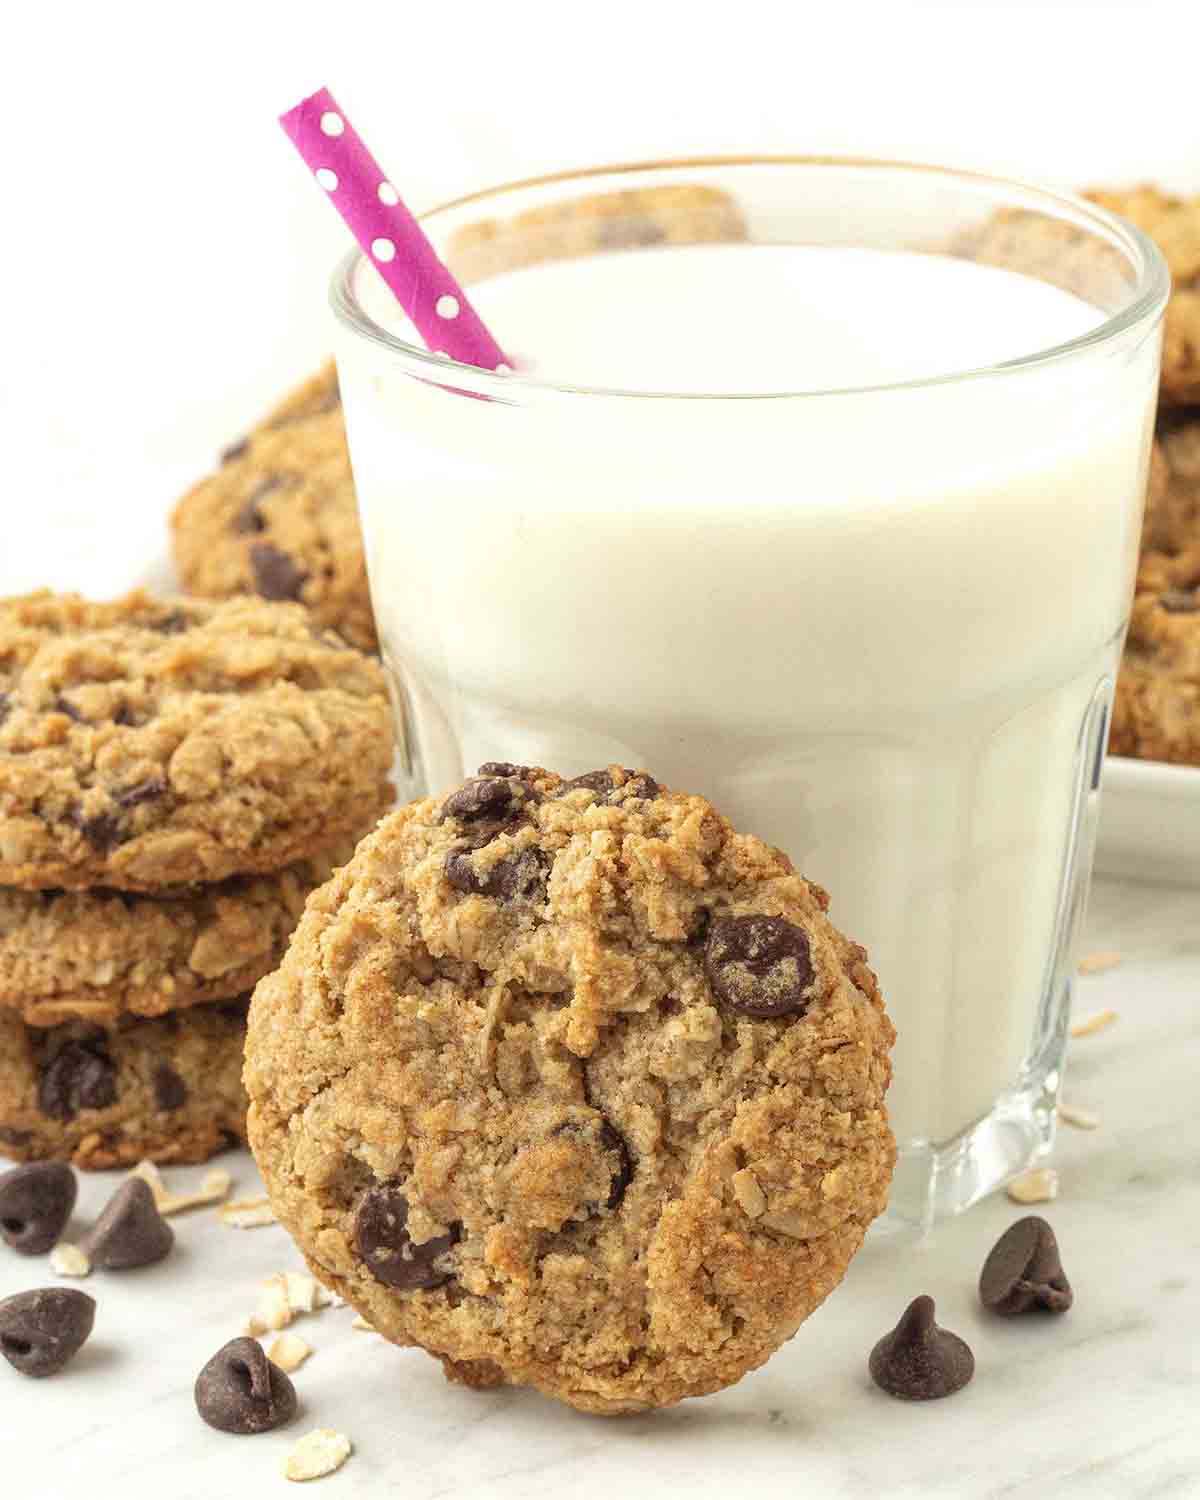 An almond flour oatmeal cookie leaning against a glass of almond milk.